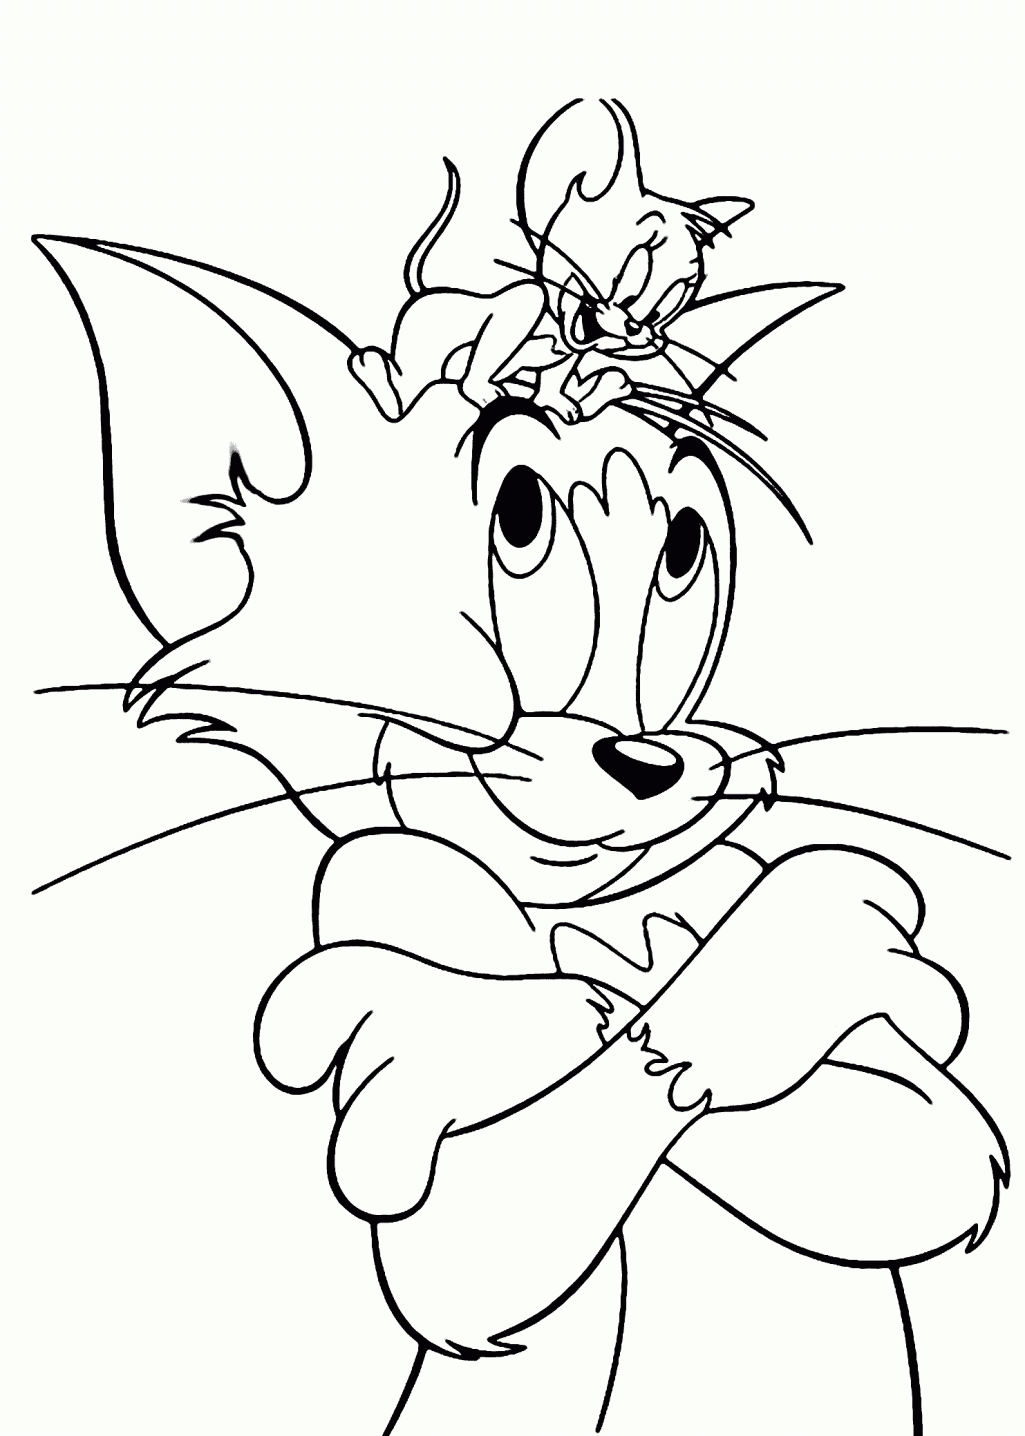 Download Jerry Coloring Page - Coloring Home